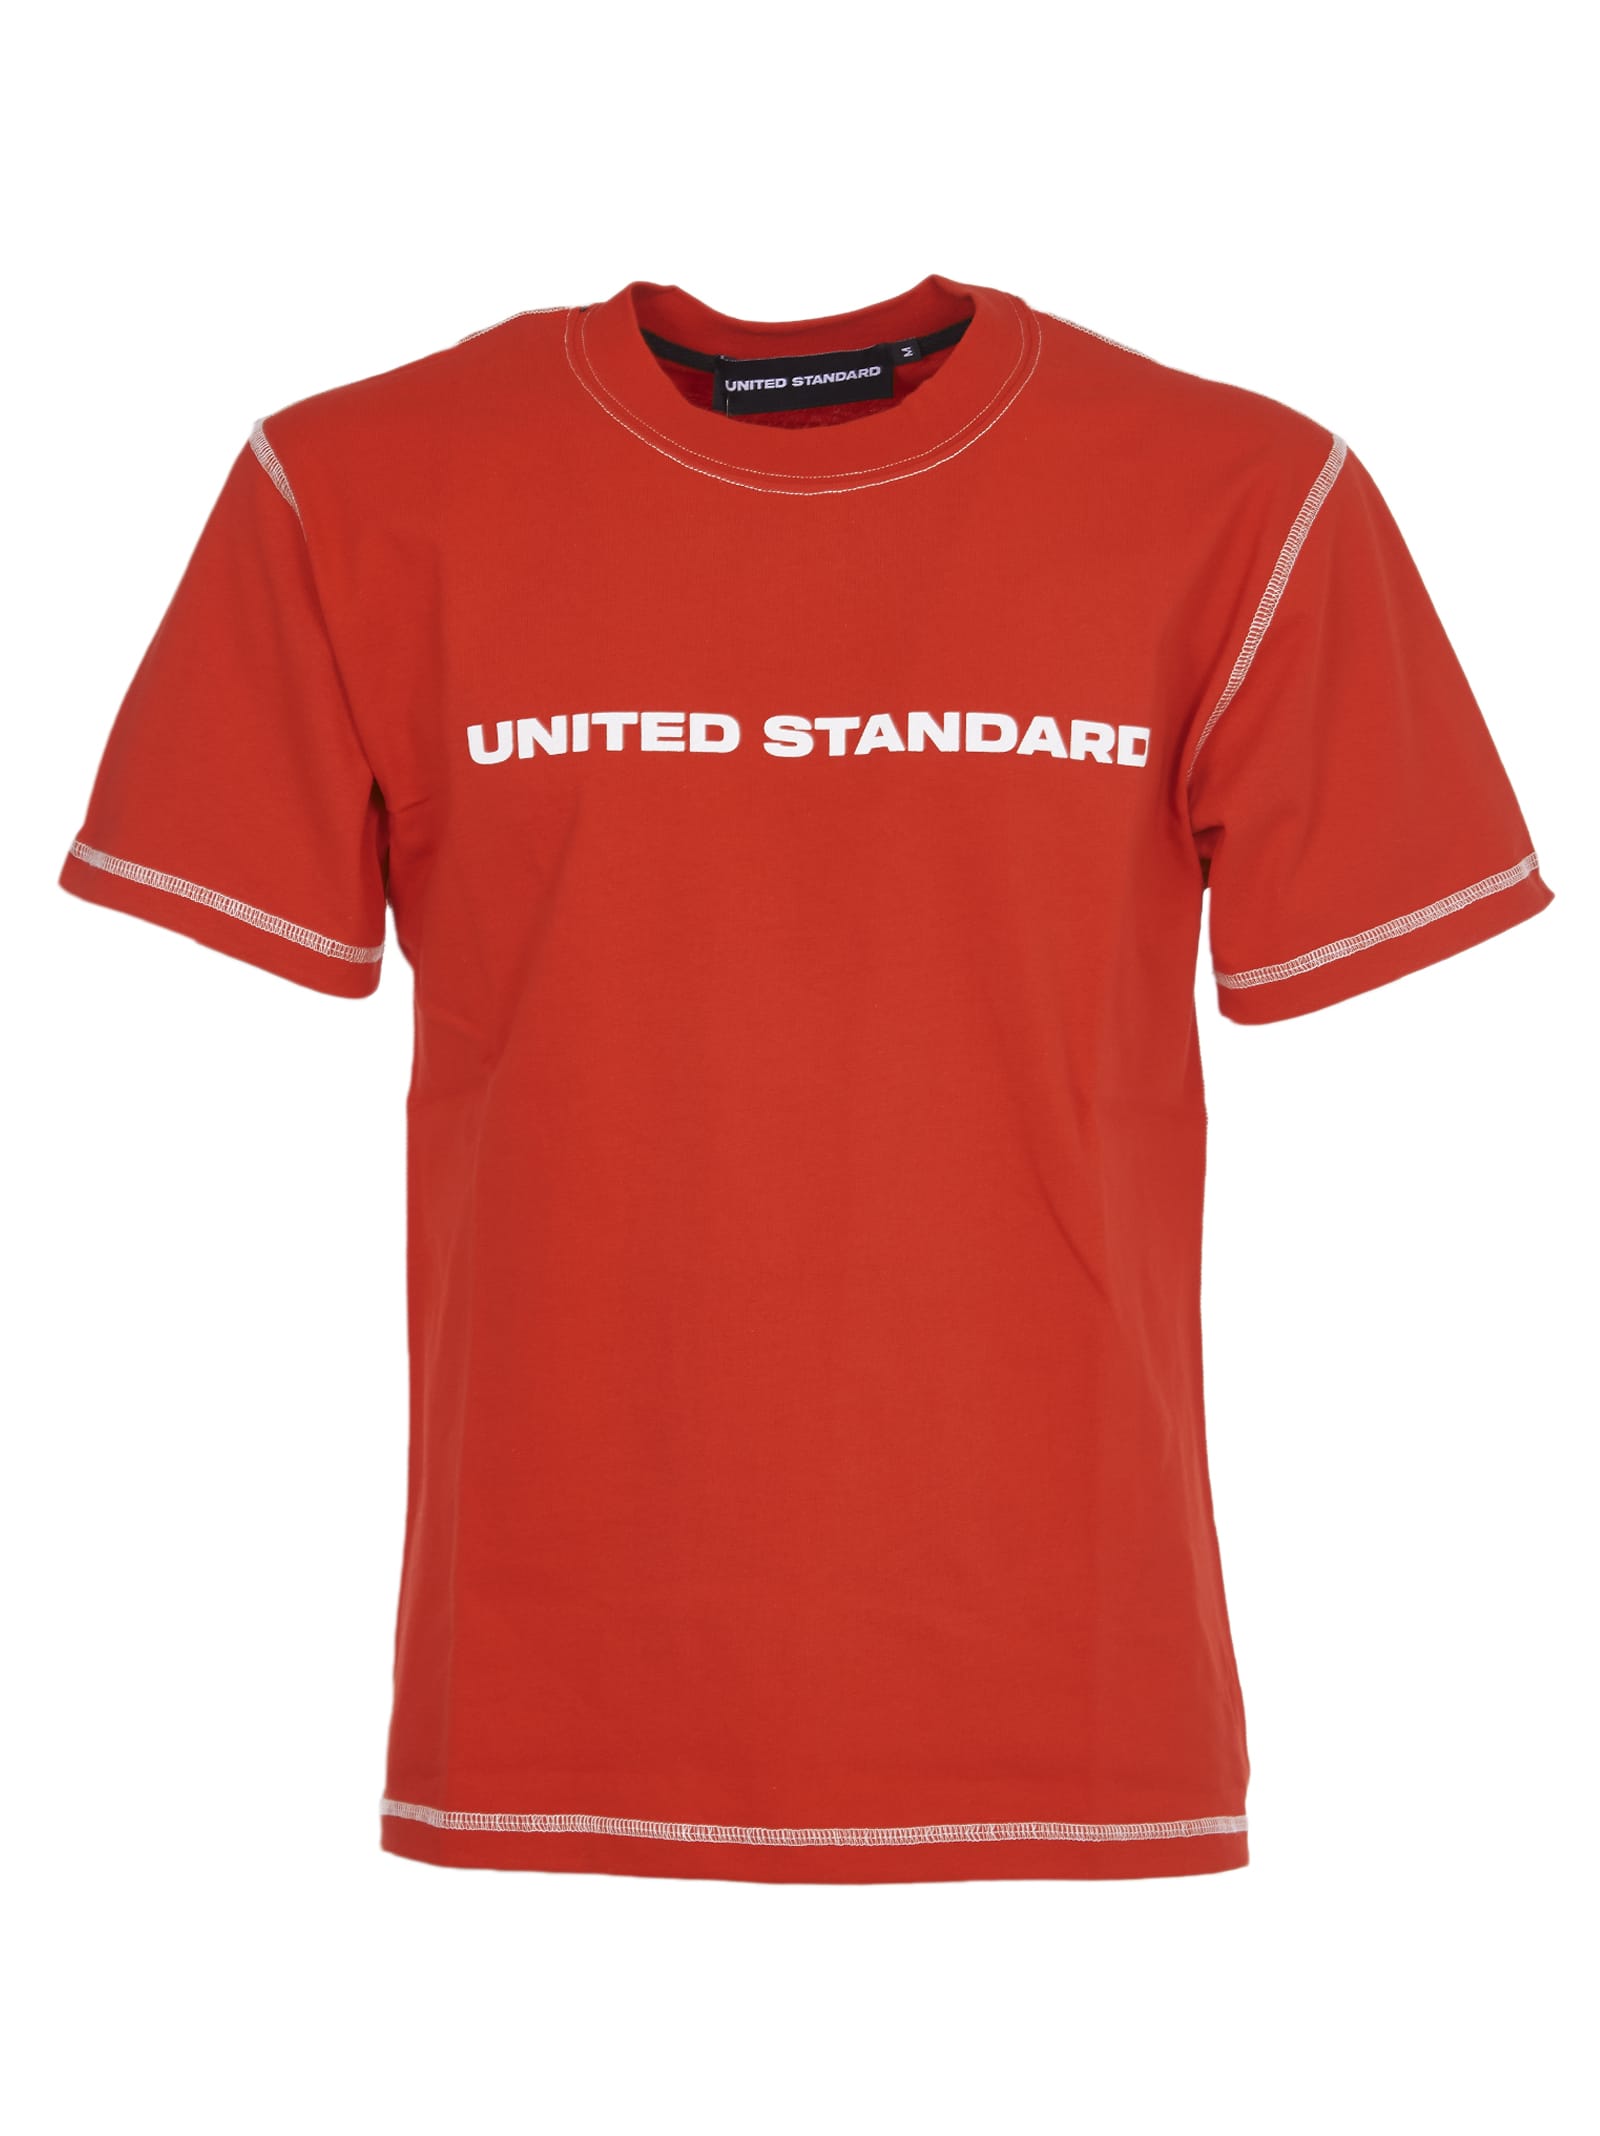 UNITED STANDARD RED T-SHIRT WITH LOGO,20SUSTS01 /RED